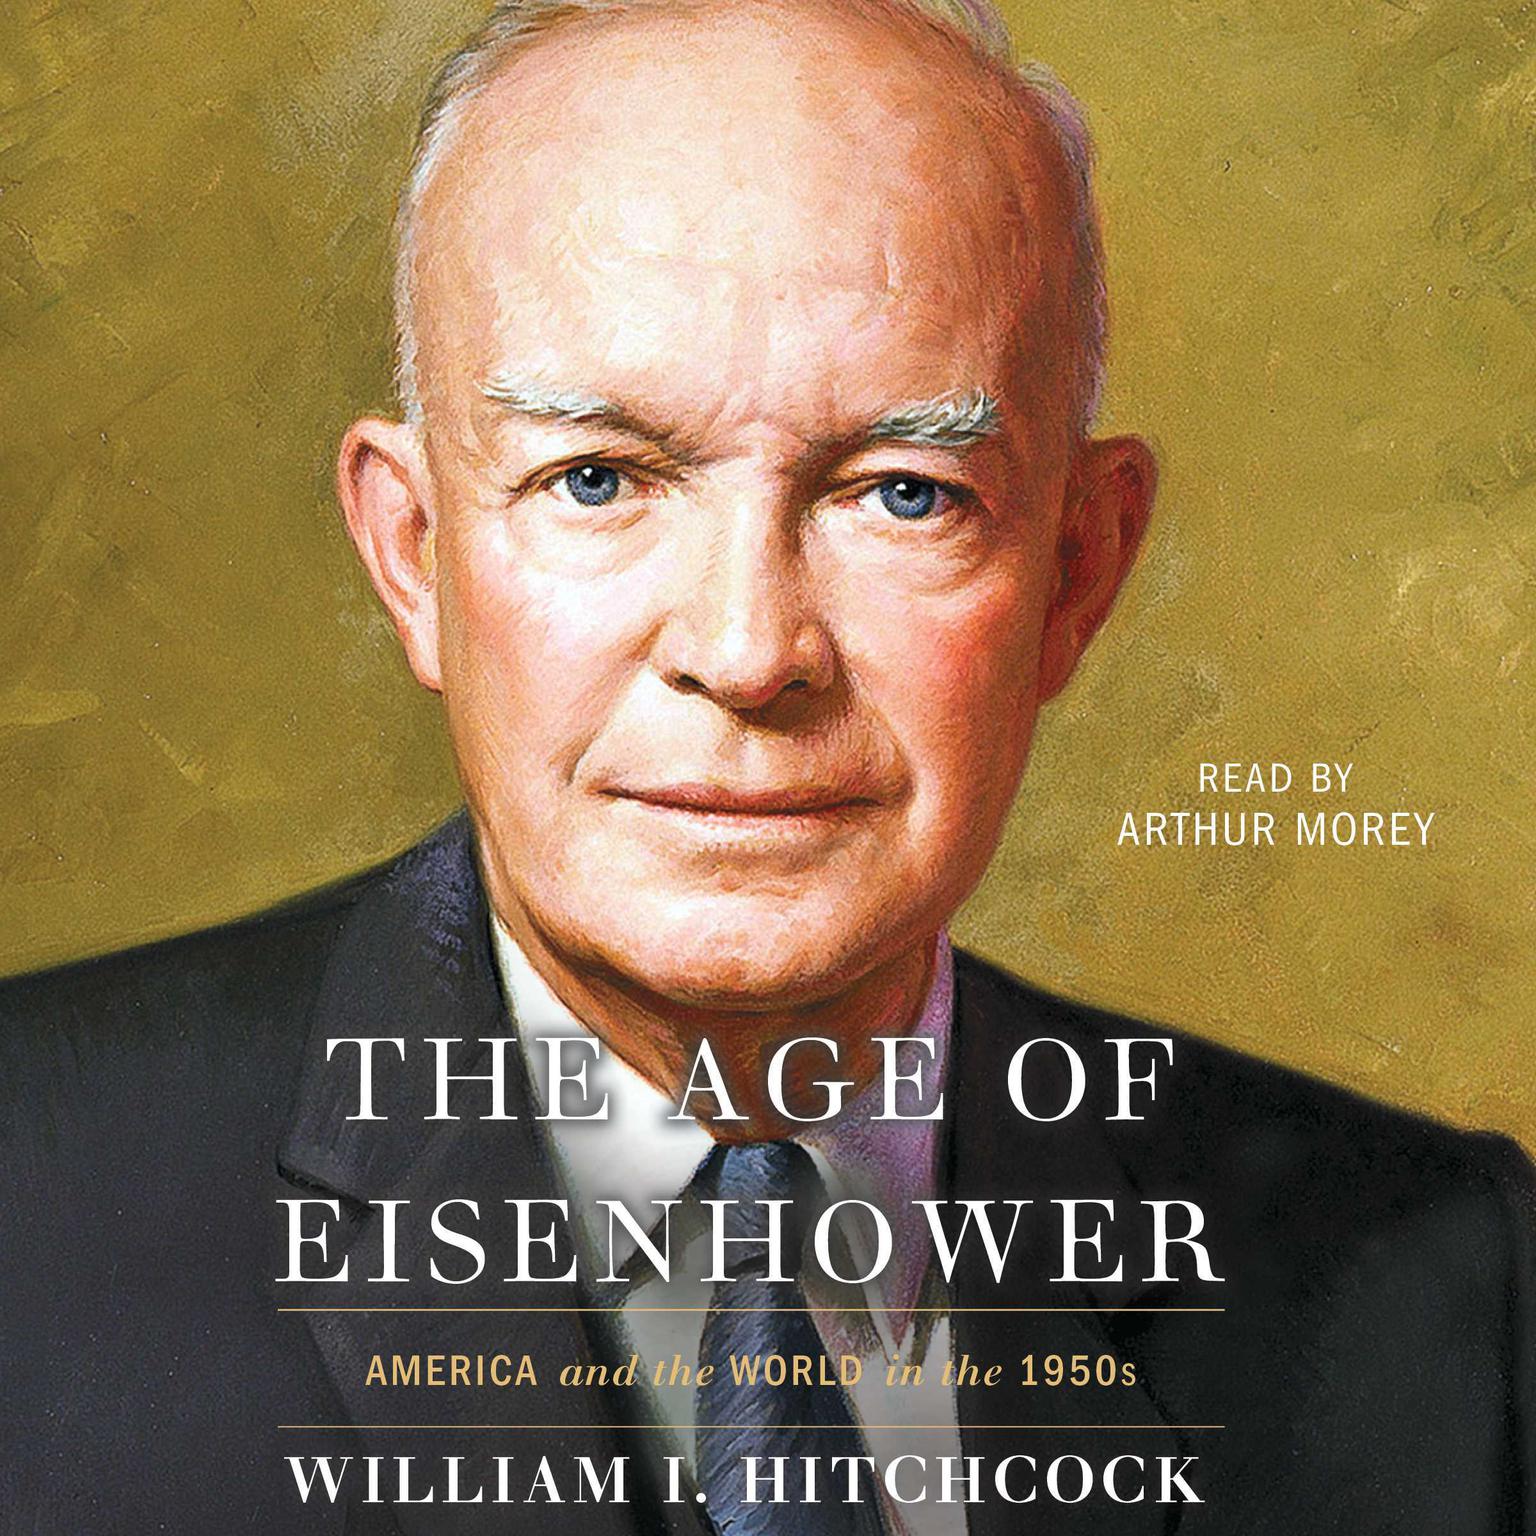 The Age of Eisenhower: America and the World in the 1950s Audiobook, by William I. Hitchcock